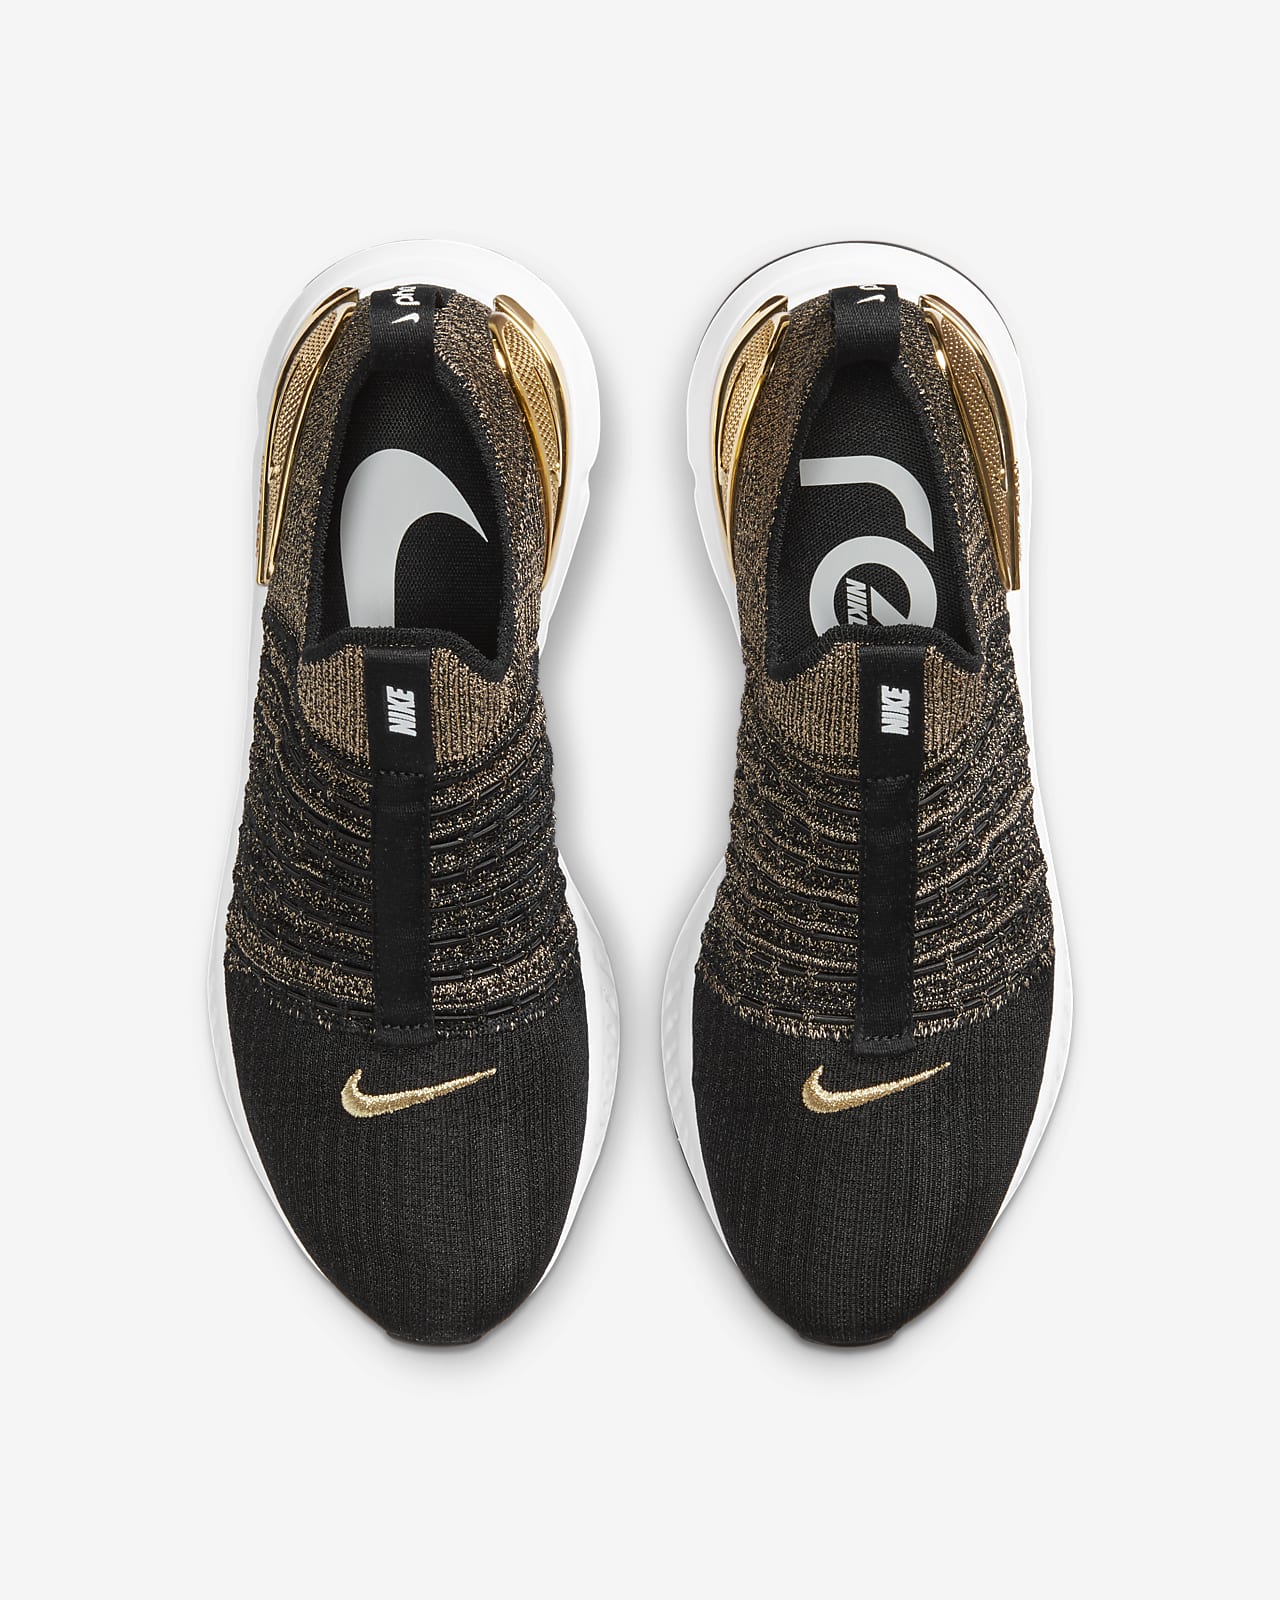 nike flyknit gold and black